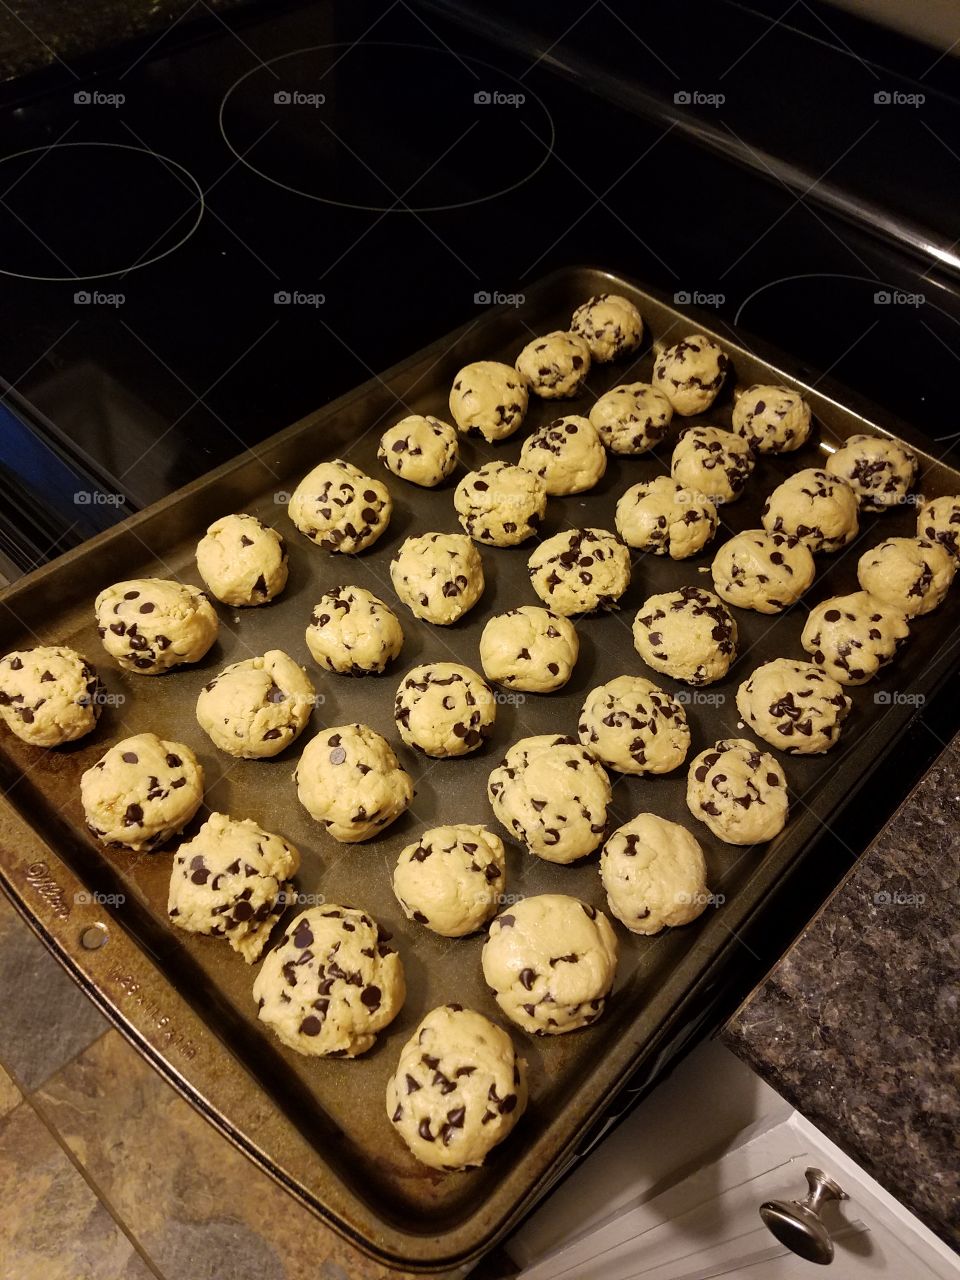 Soft Batch Chocolate Chip Cookies on Baking Sheet